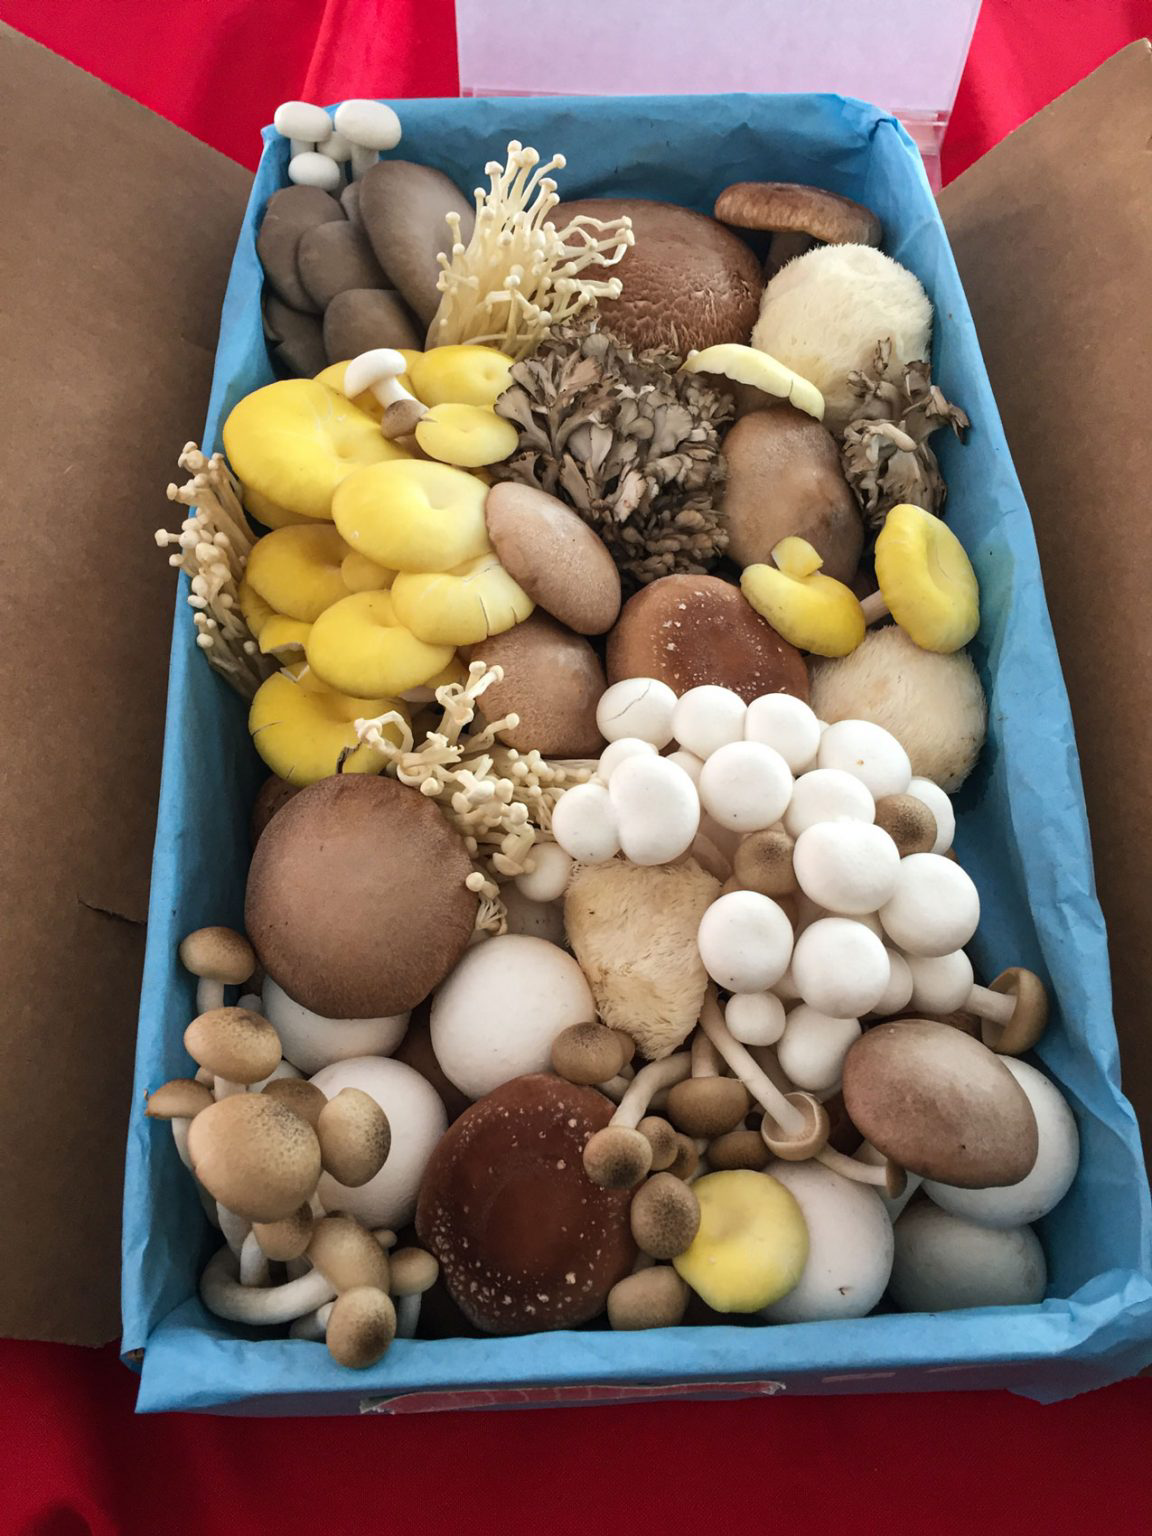 A blue box filled with a variety of hand-picked mushrooms.